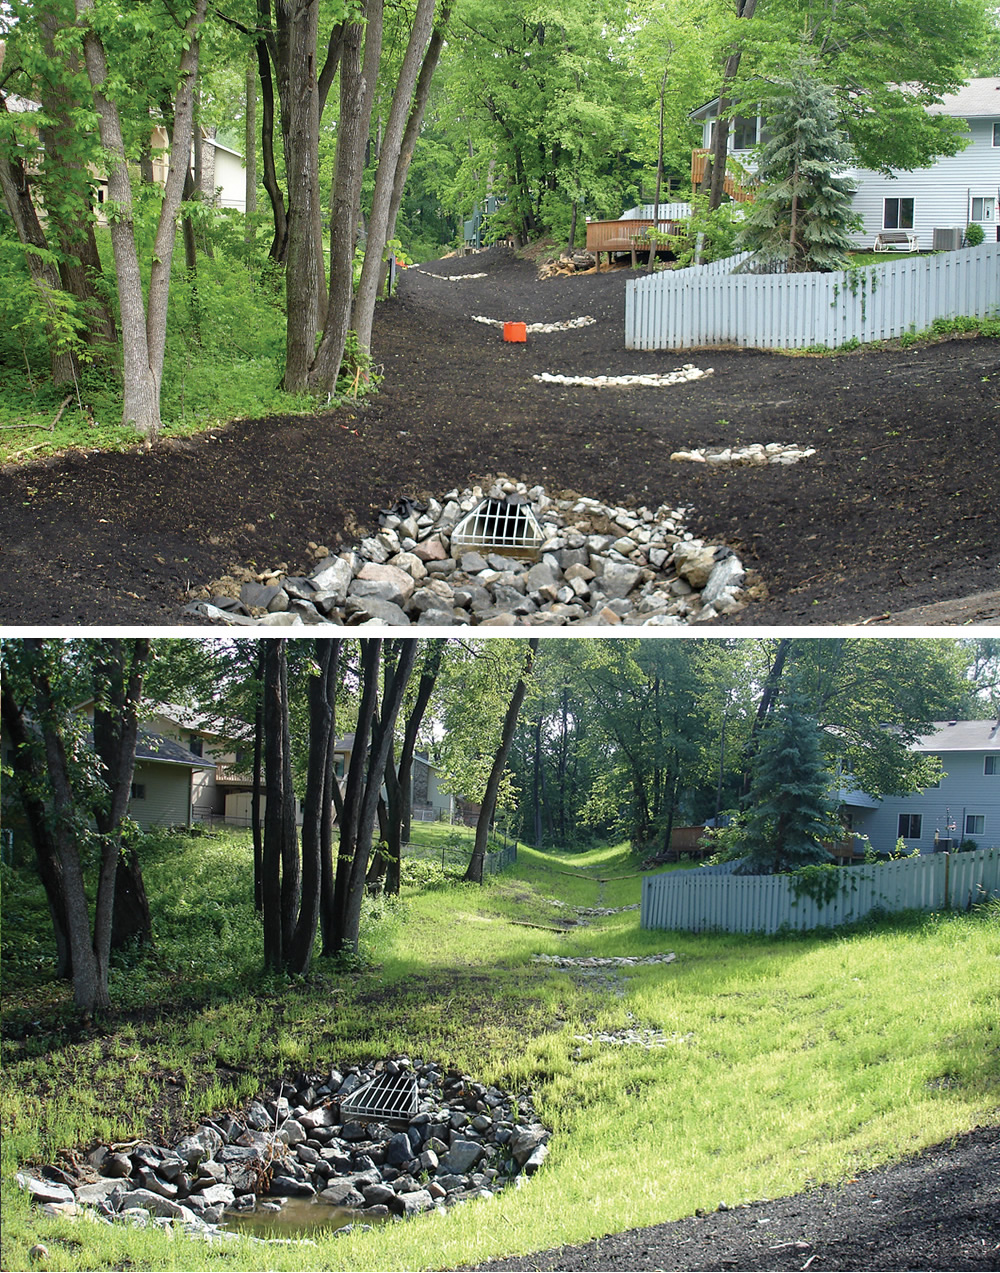 In May 2008, contractors installed a small run of sewer pipe in the upper portion of Wood Creek as well as rocks for bank protection, and covered the project area (top) with a two to four inch compost blanket to control erosion and sedimentation, as well as serve as a growing medium (vegetation shown bottom).